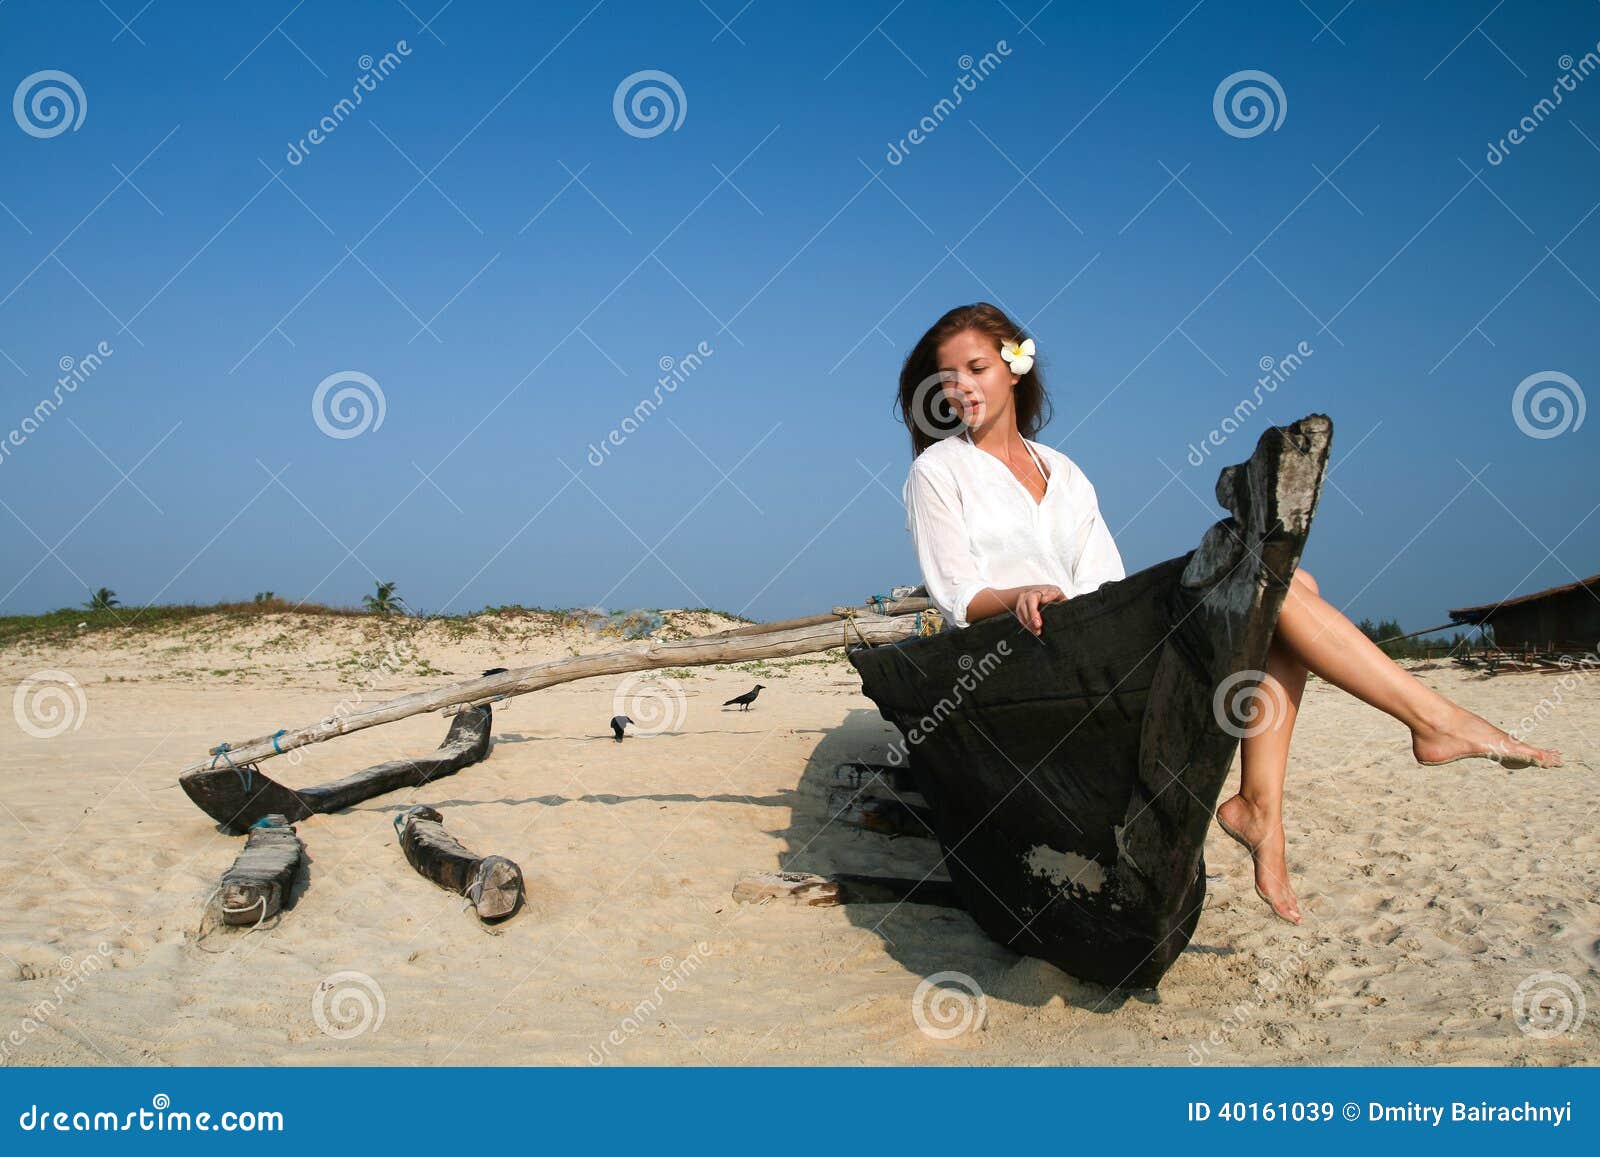 Woman In Boat Stock Photo - Image: 40161039